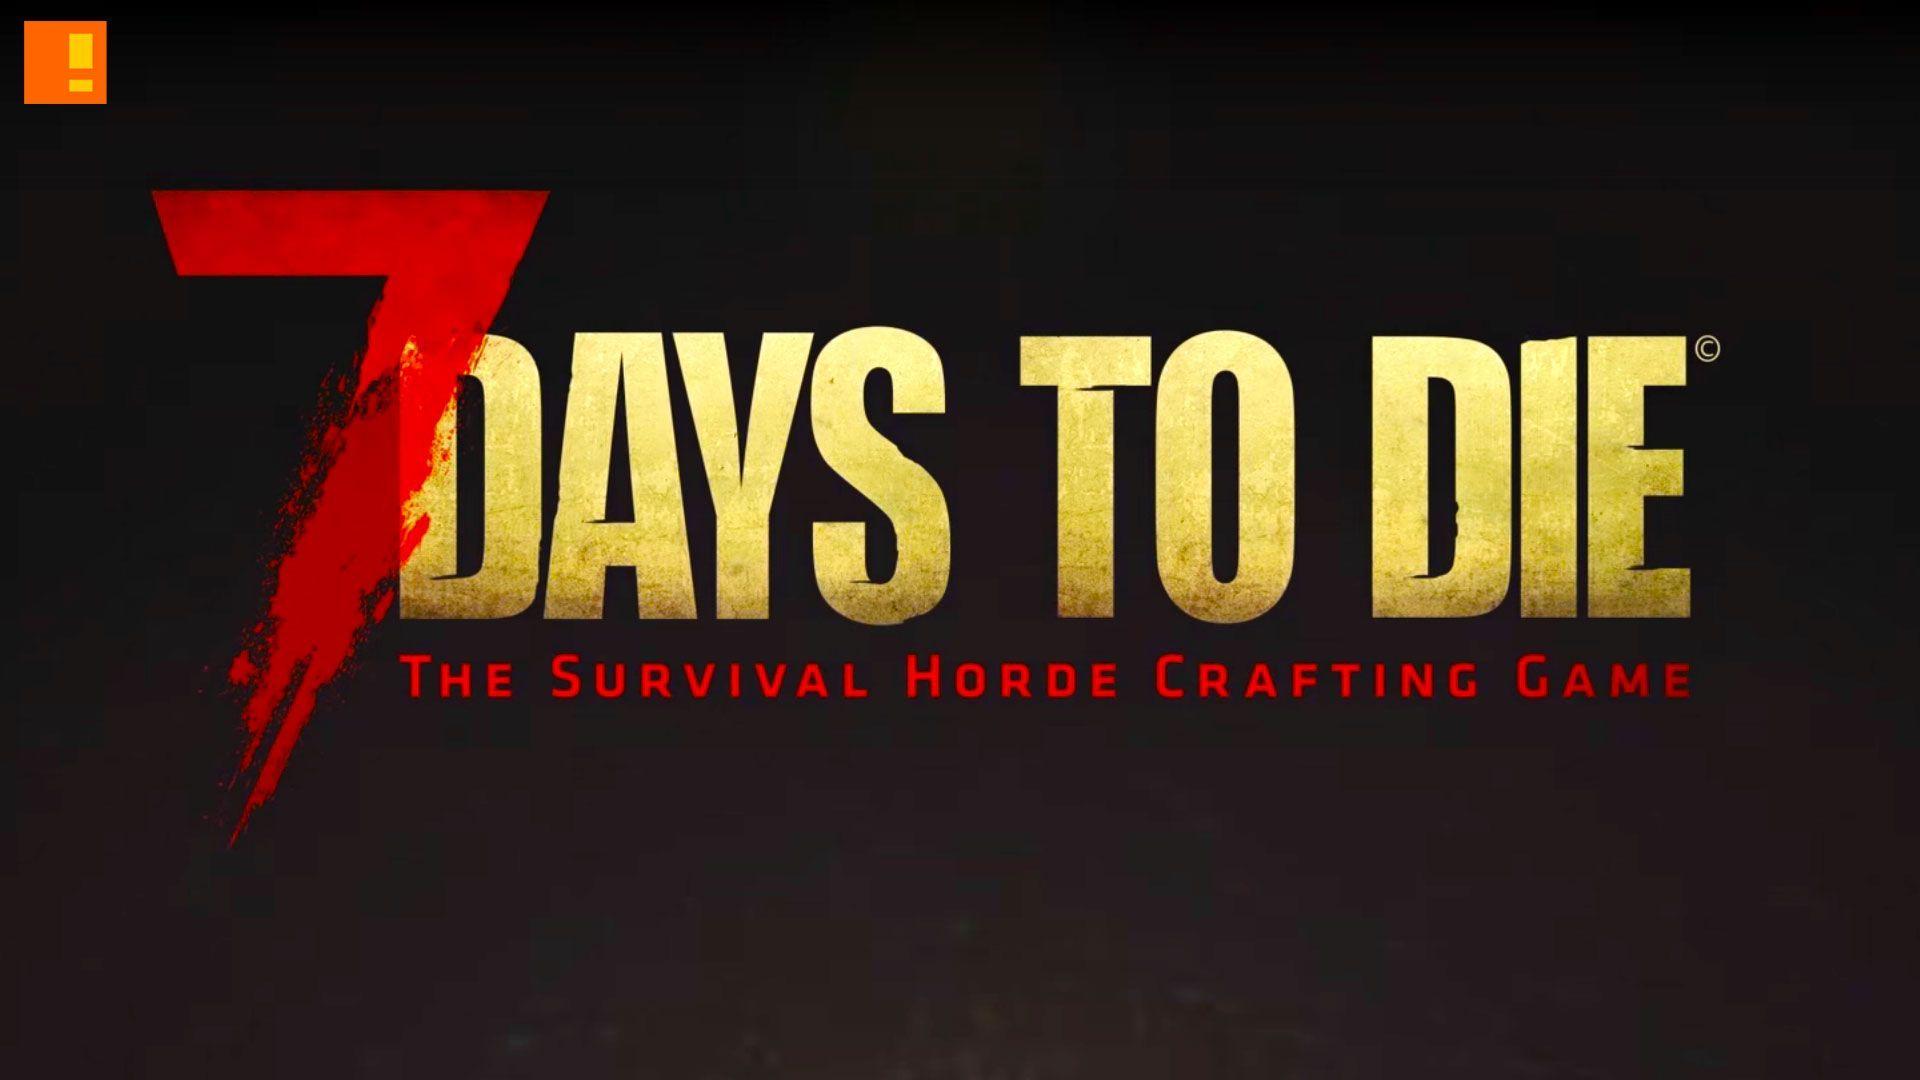 The 7 days to die steam фото 72